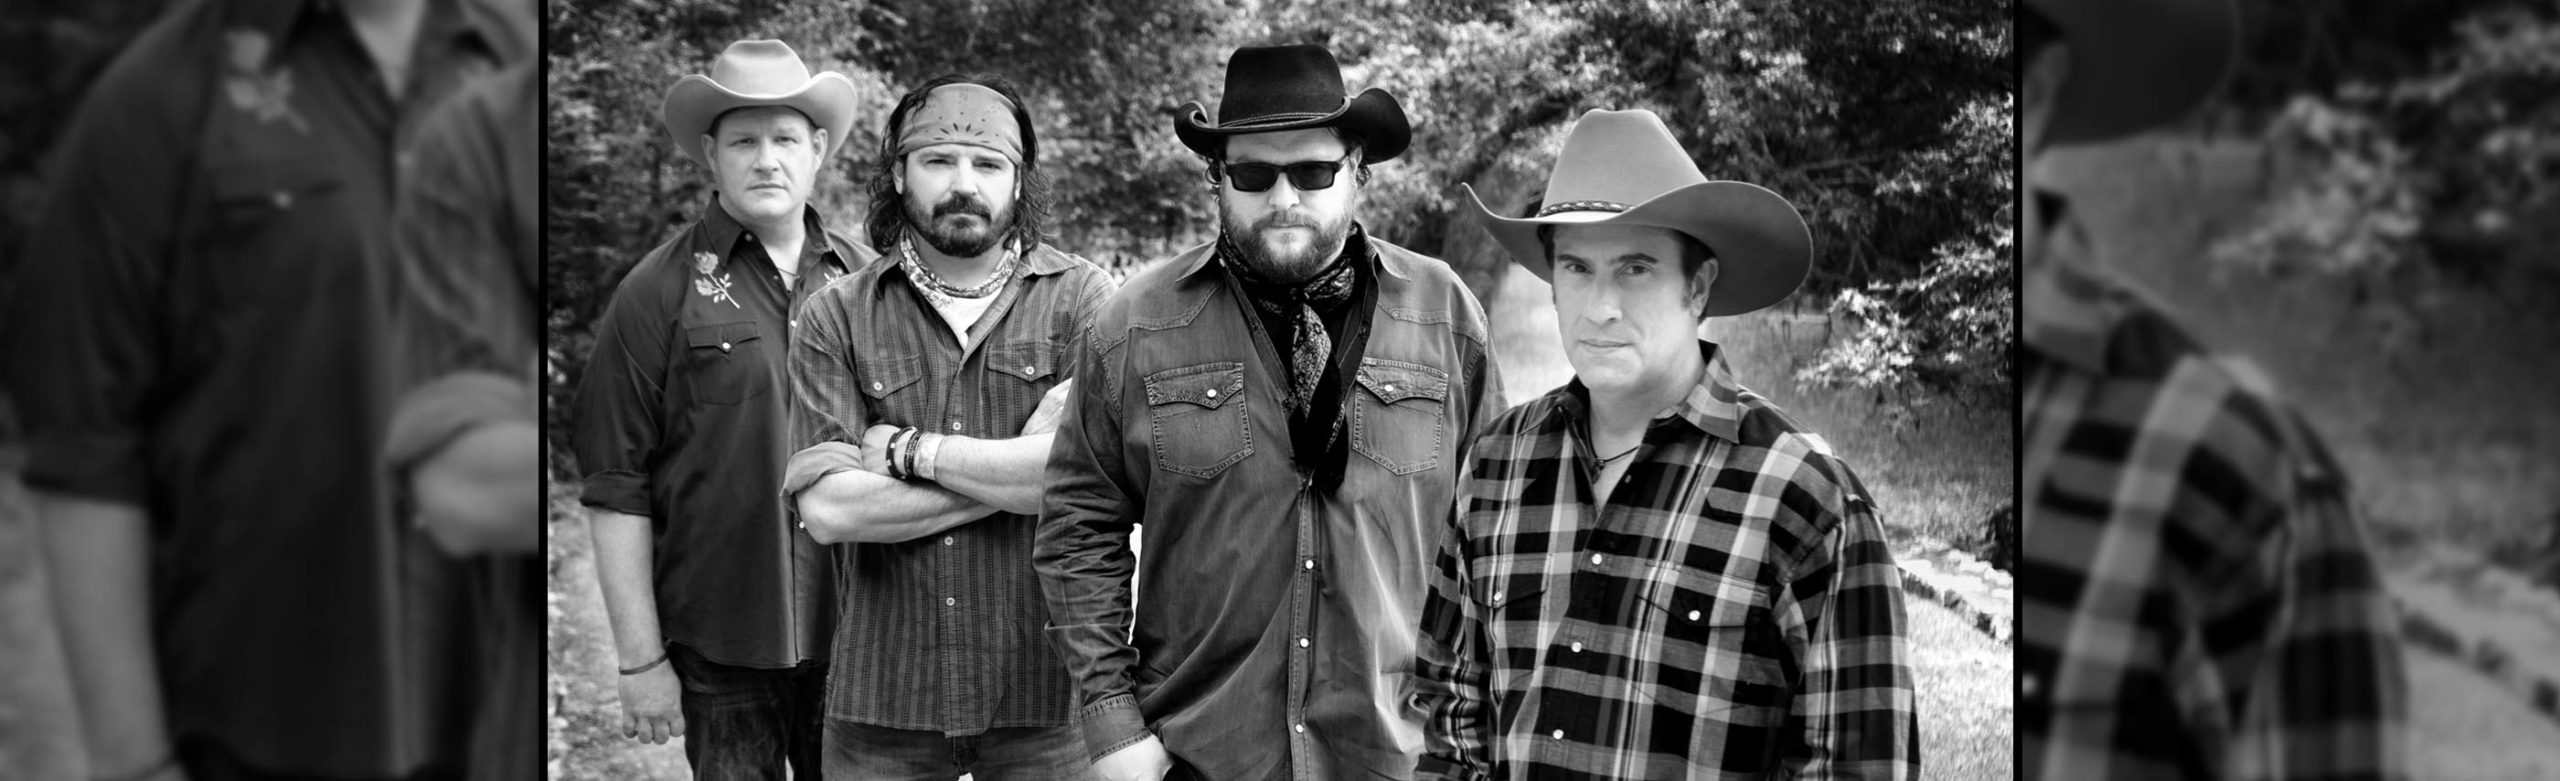 Reckless Kelly to Bring Country Rock Back to Wilma Image